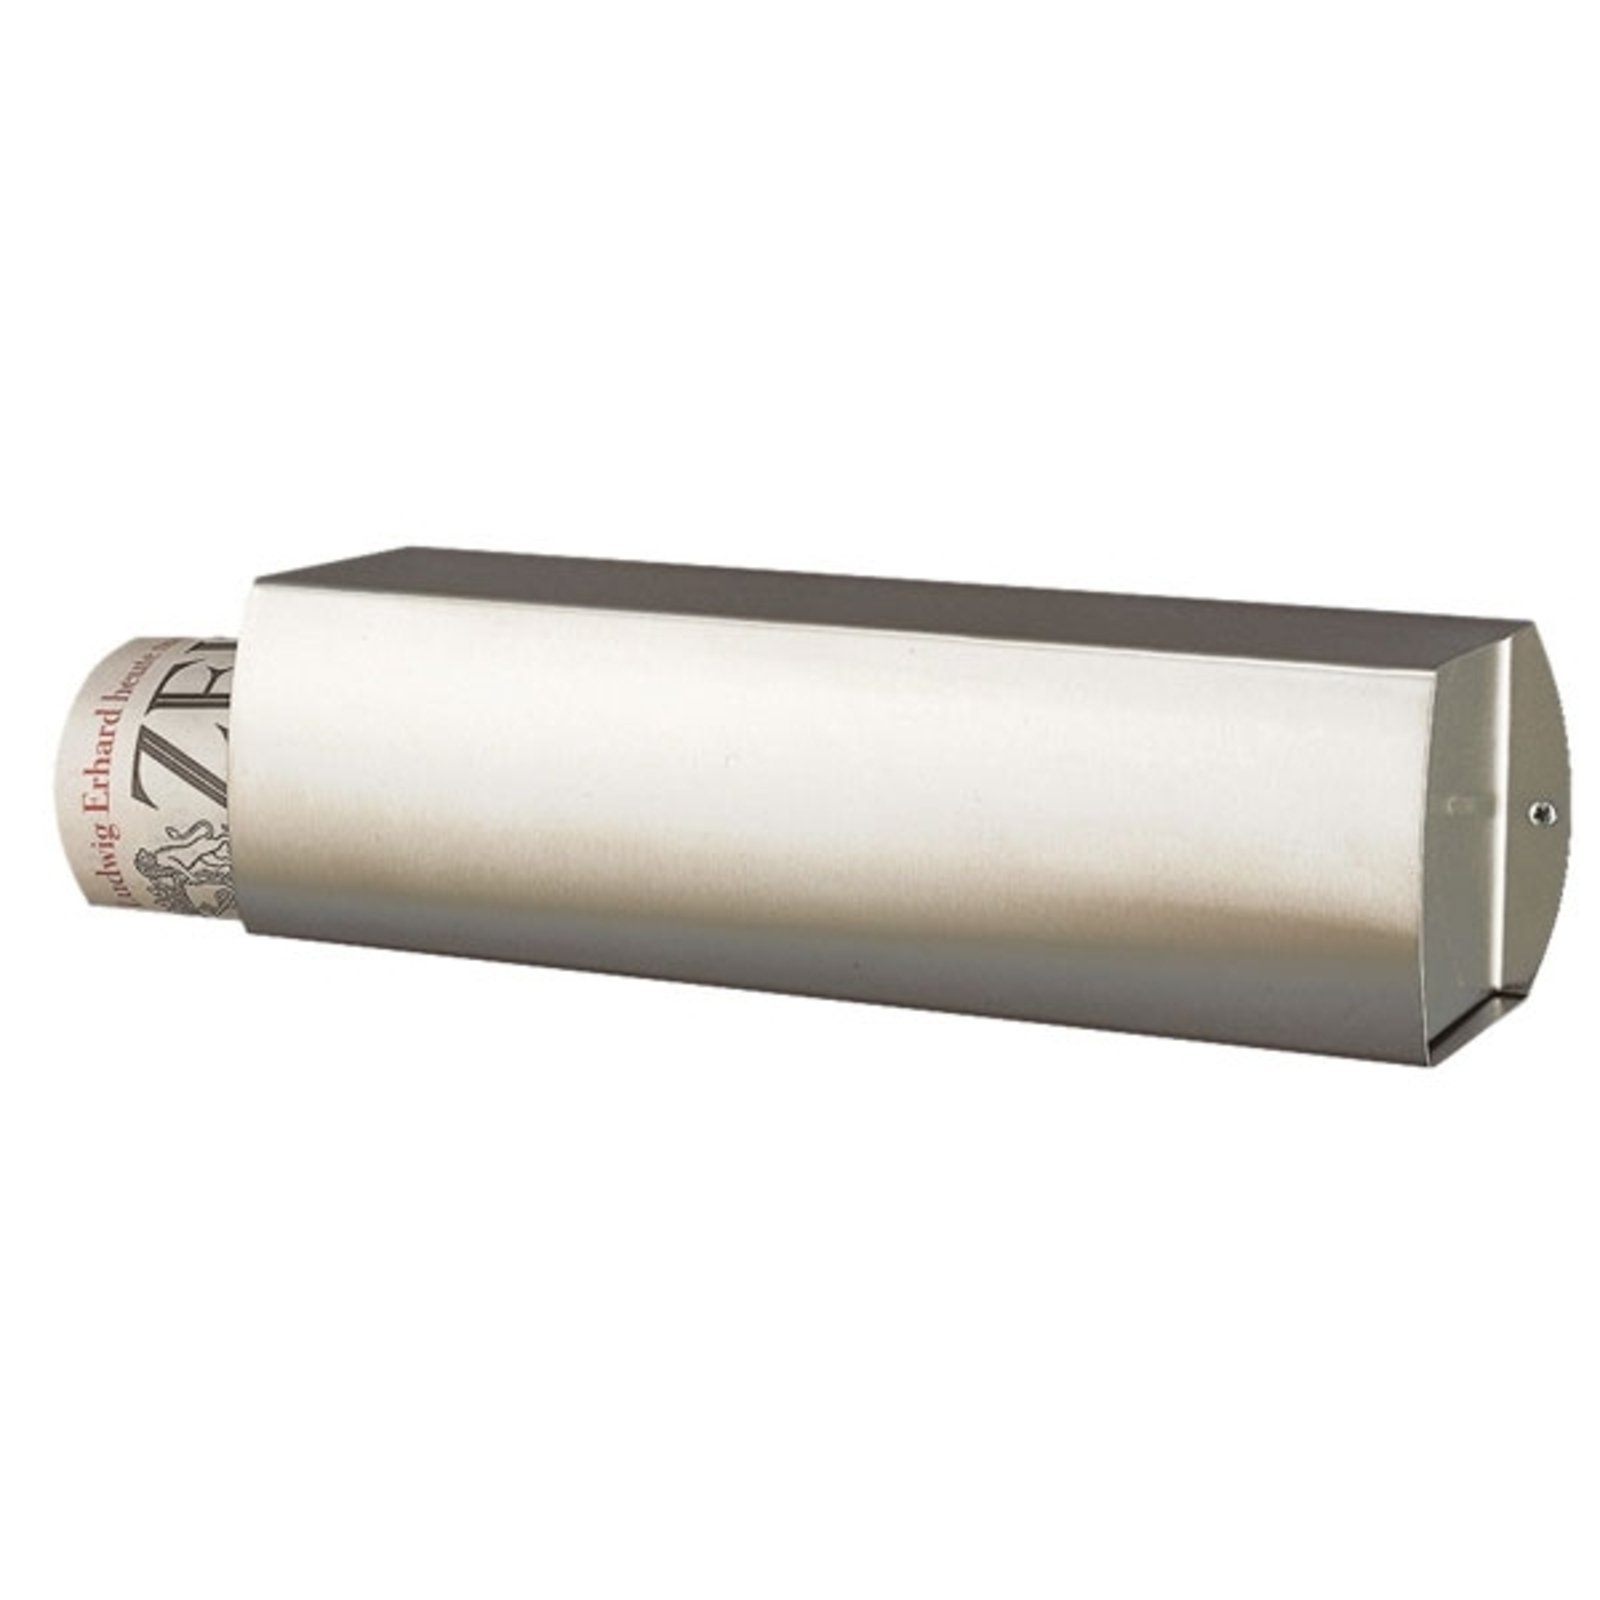 Newspaper roll LA OLA made of stainless steel